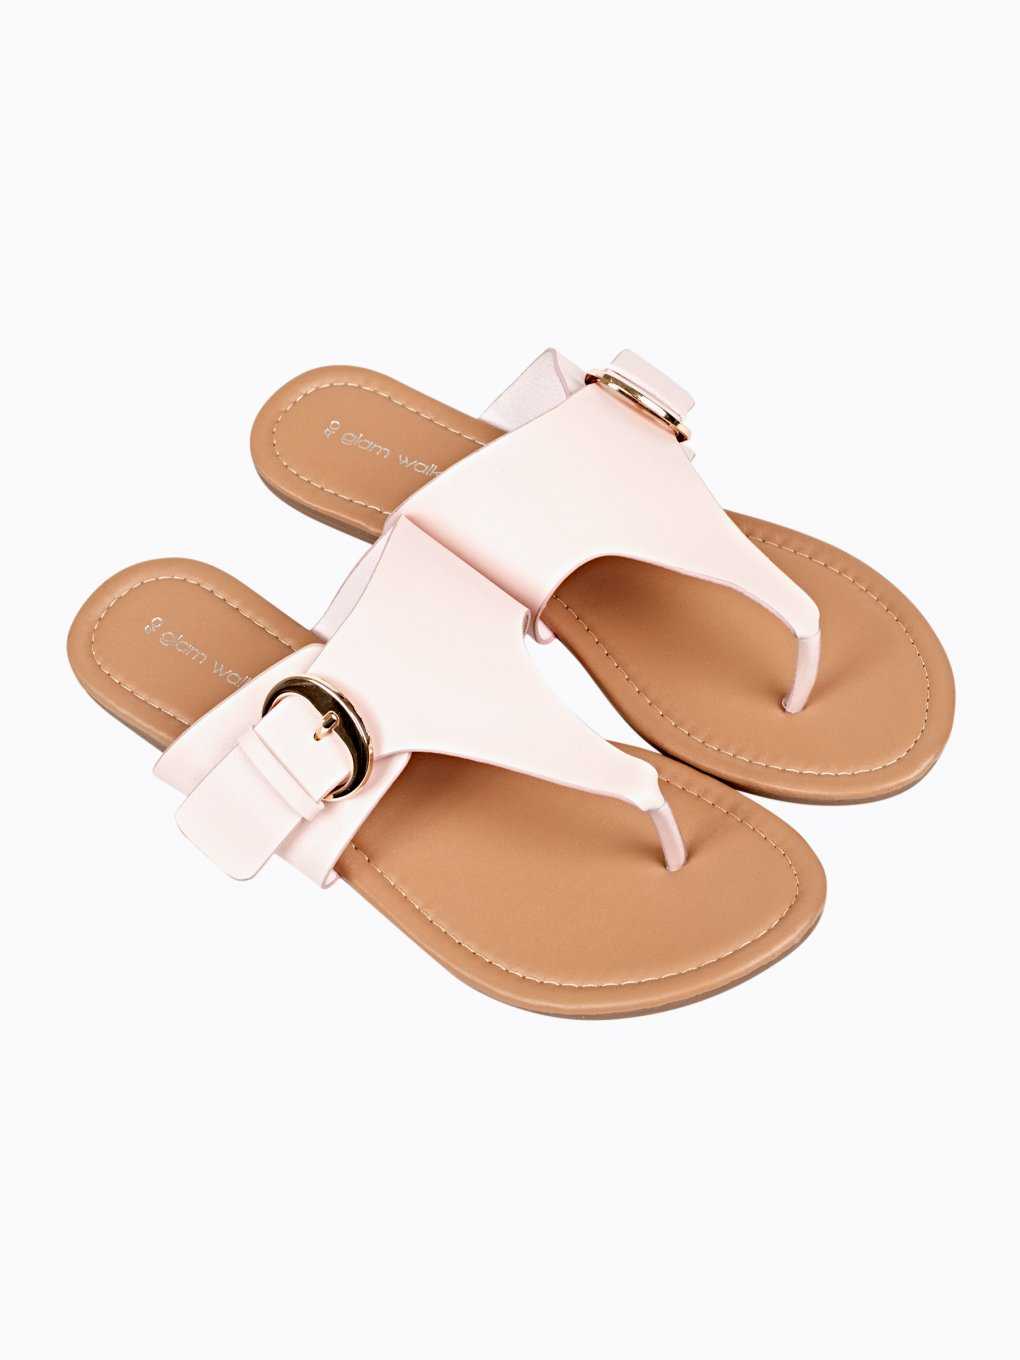 Flat slides with buckle details